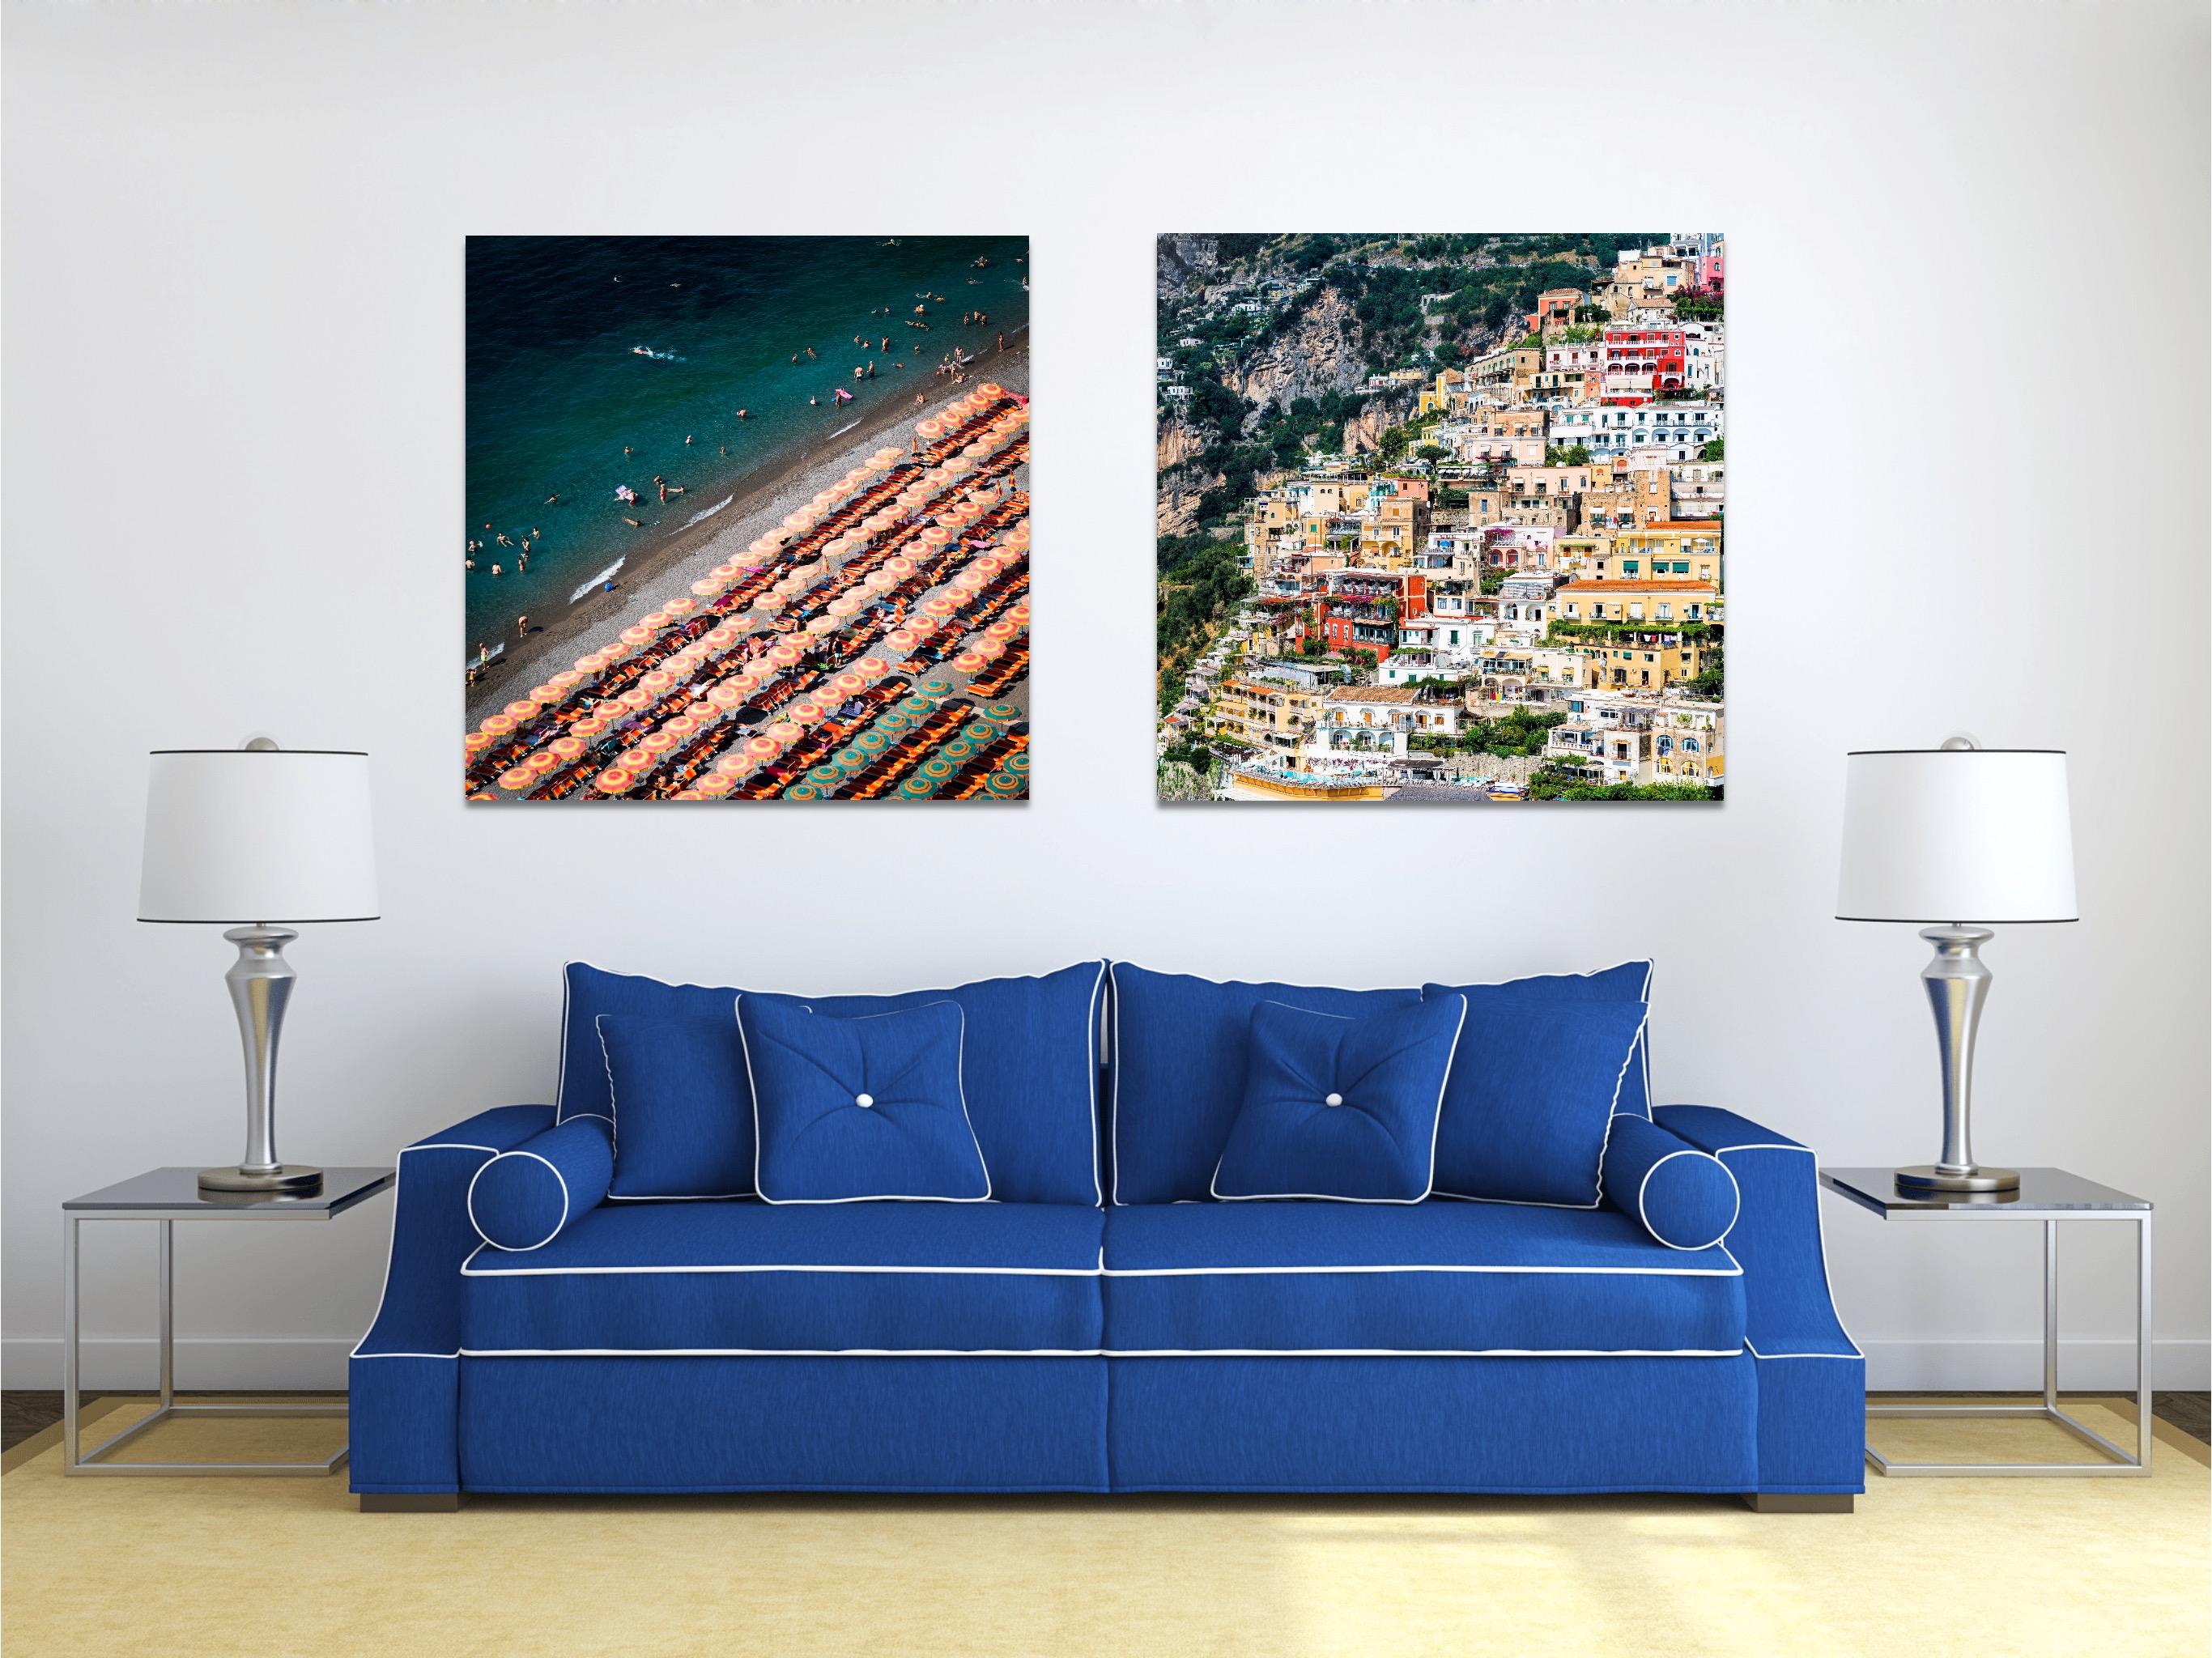 This contemporary coastal photograph by Peter Mendelson captures a sunny, summer day on a beach along the Amalfi Coast in Italy. The title, meaning 